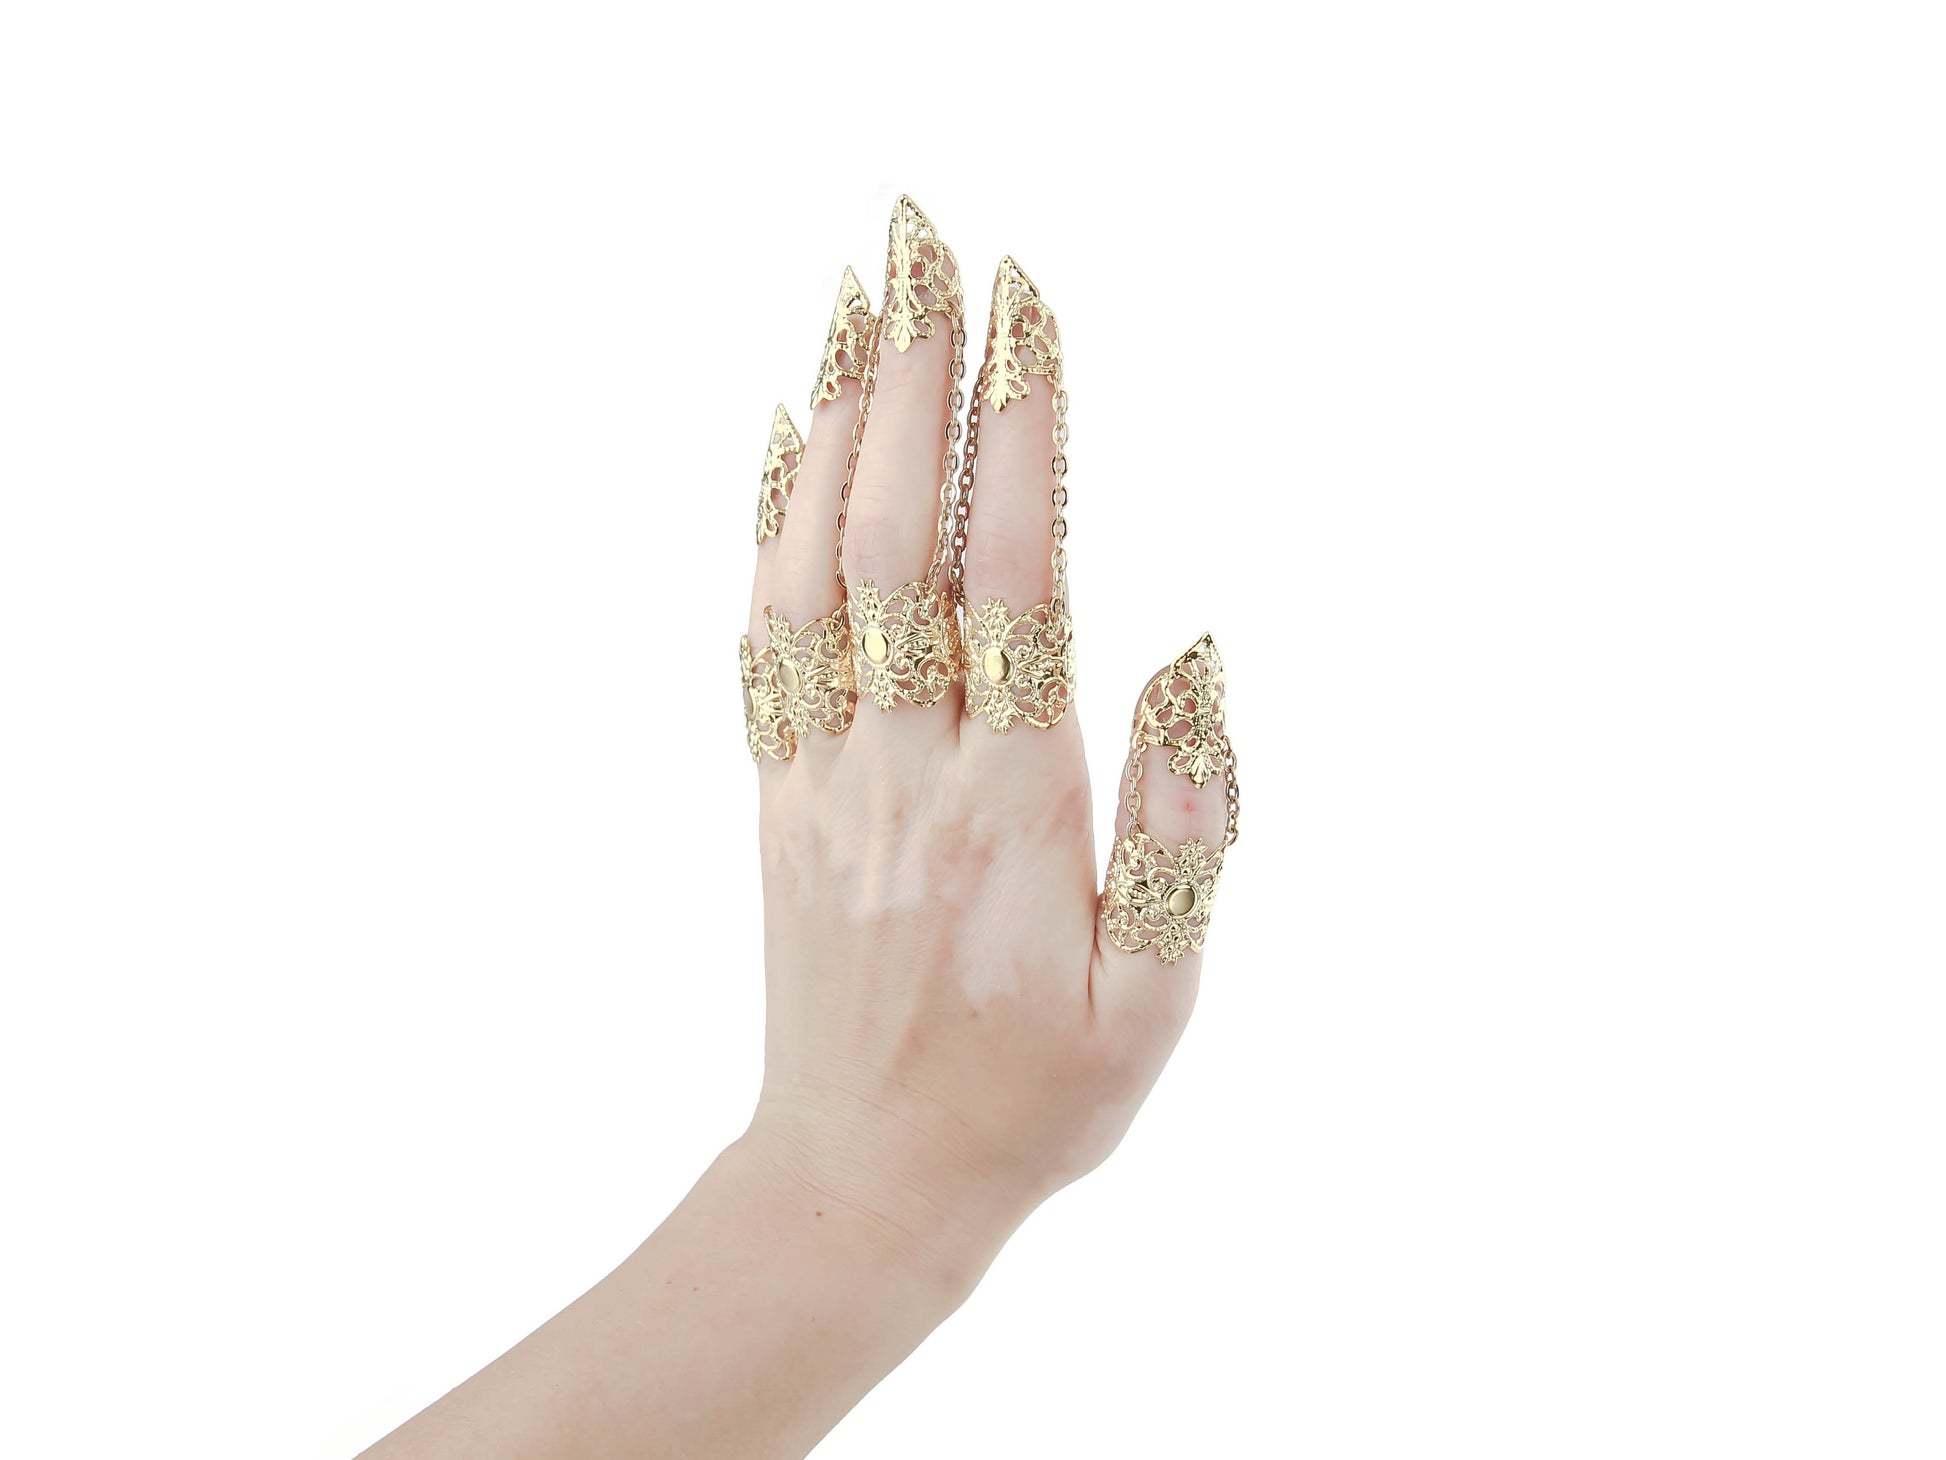 A hand elegantly displays Myril Jewels' full set of intricate gold rings with nail claws, perfect for neo-gothic style enthusiasts. The exquisite craftsmanship is ideal for Halloween, punk fashion statements, or as a standout accessory for whimsigoth and witchcore looks, also making a memorable gift for a goth girlfriend.